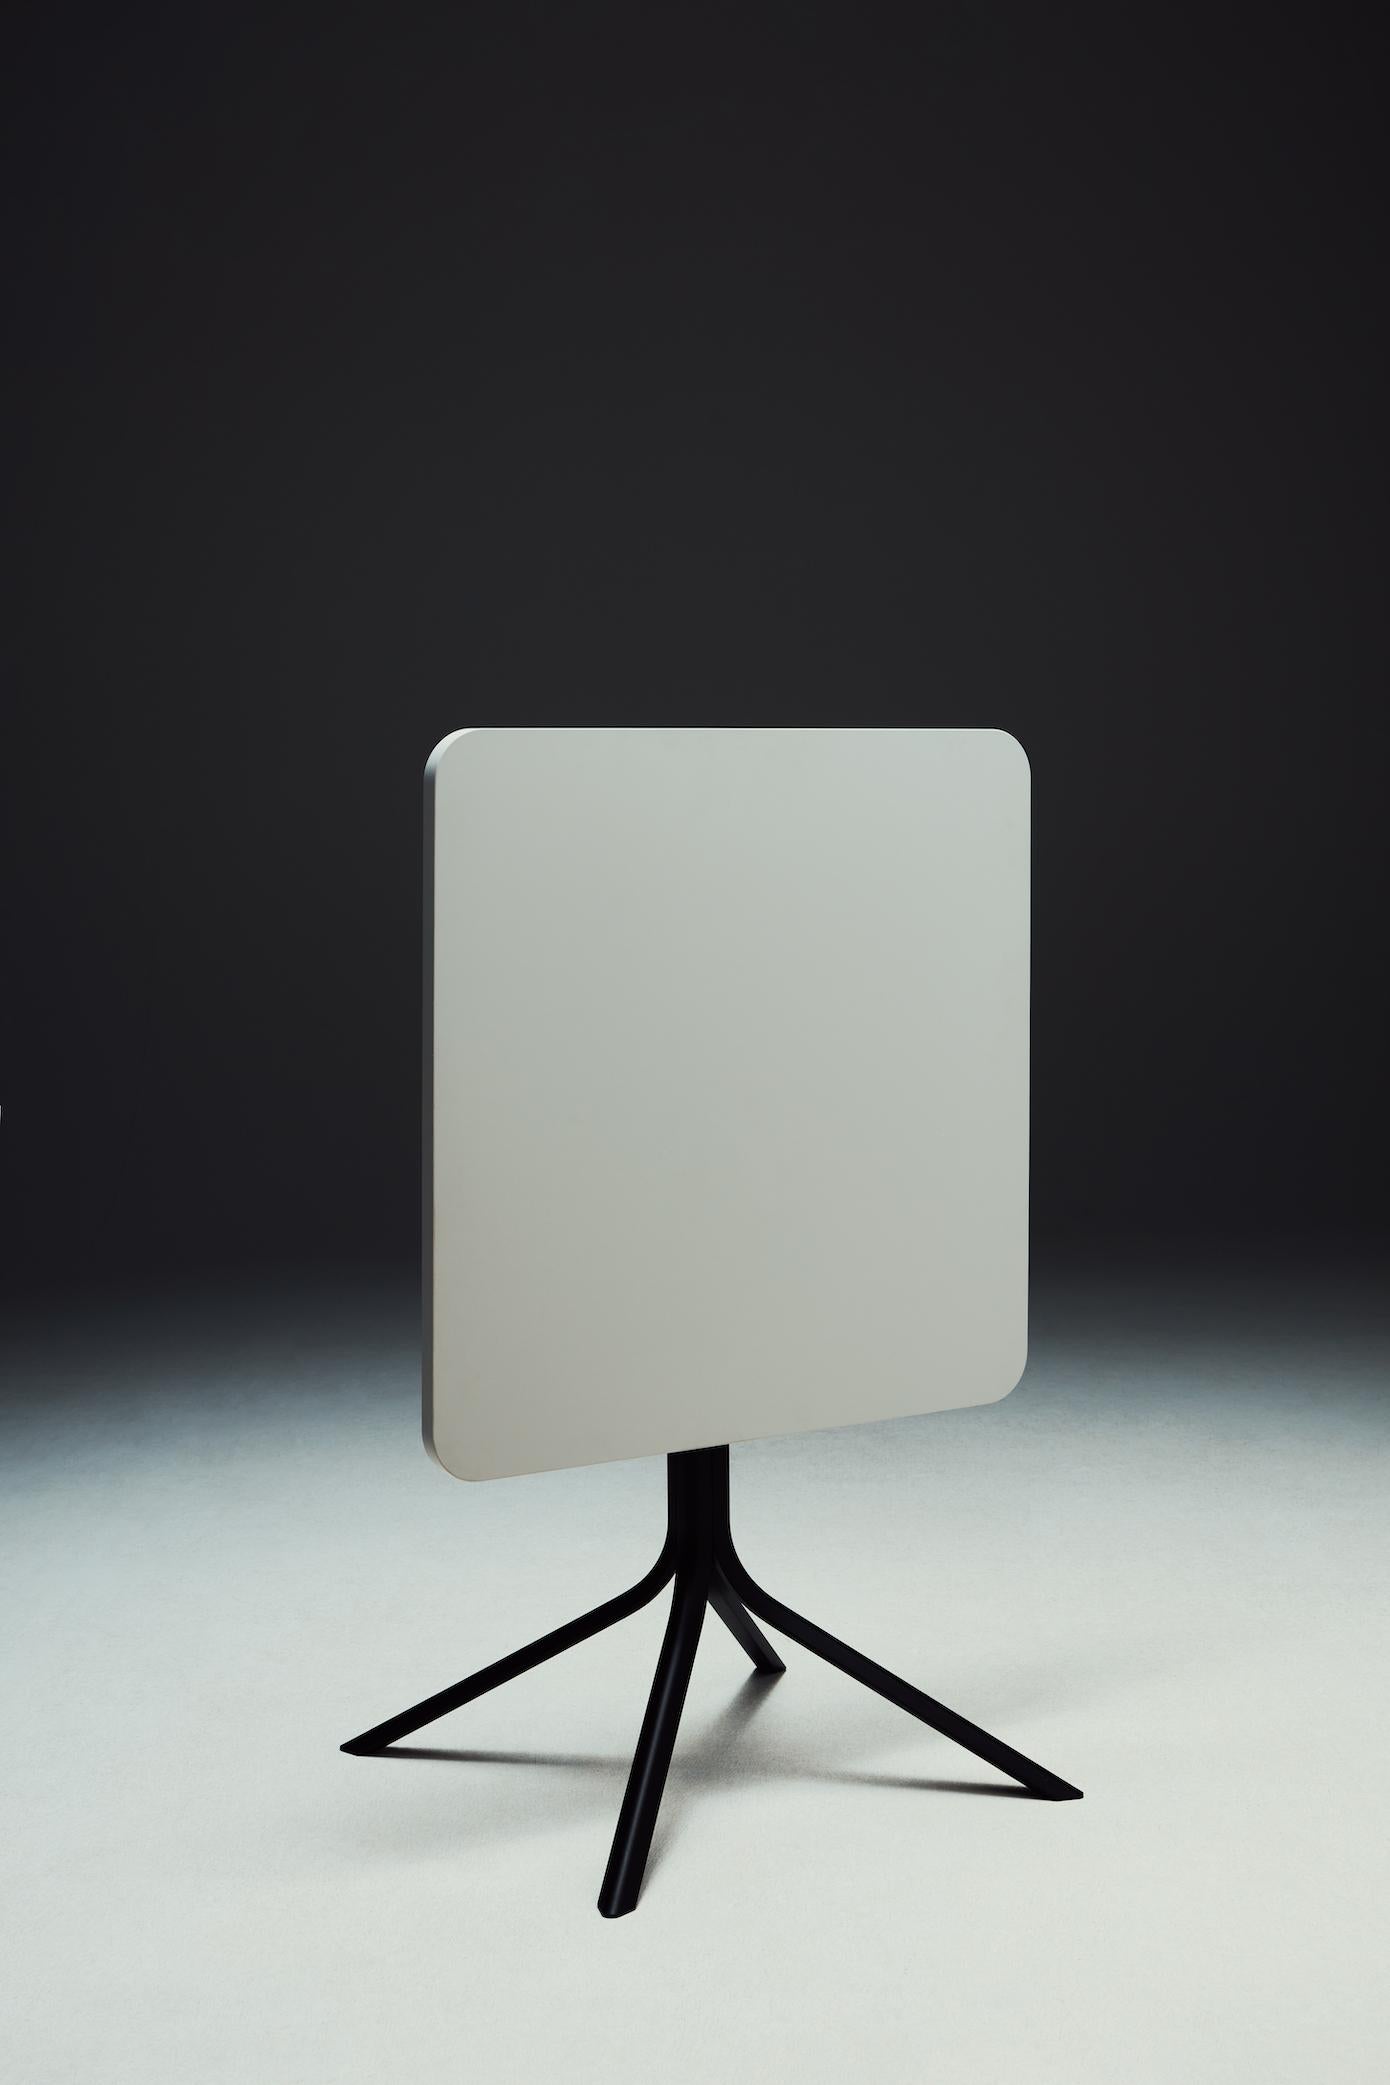 Fixed or folding.
Painted structure, top in lacquered mdf
High Tri is a contemporary, foldaway side table designed as a celebration of industrial craftsmanship. The thin extruded aluminium legs are ideally positioned to allow users to combine